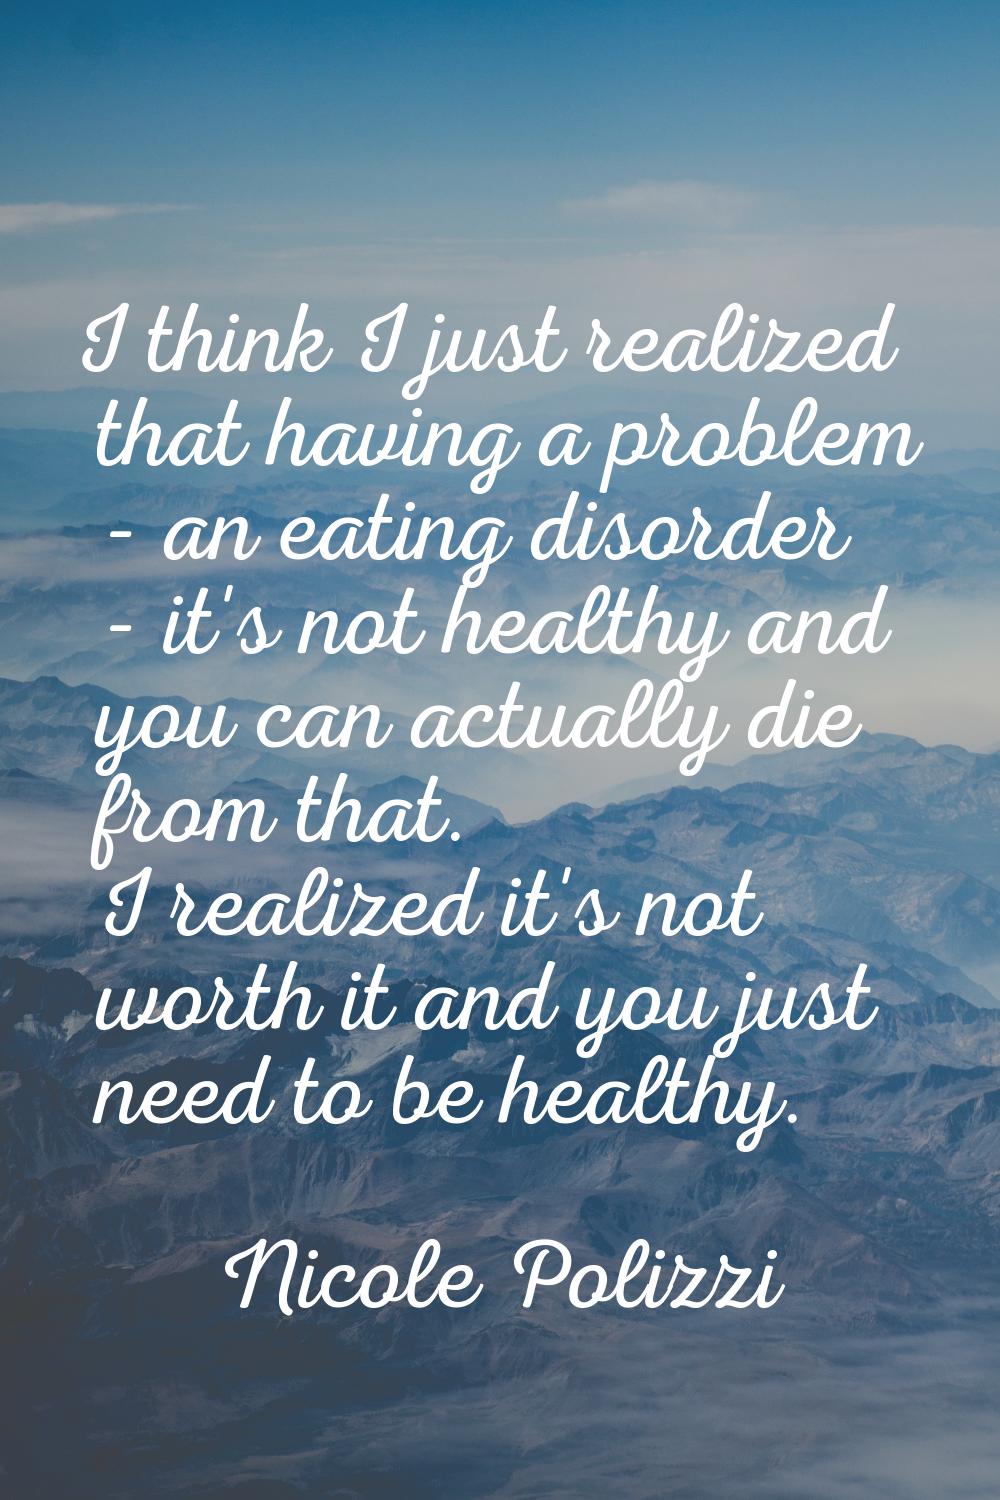 I think I just realized that having a problem - an eating disorder - it's not healthy and you can a